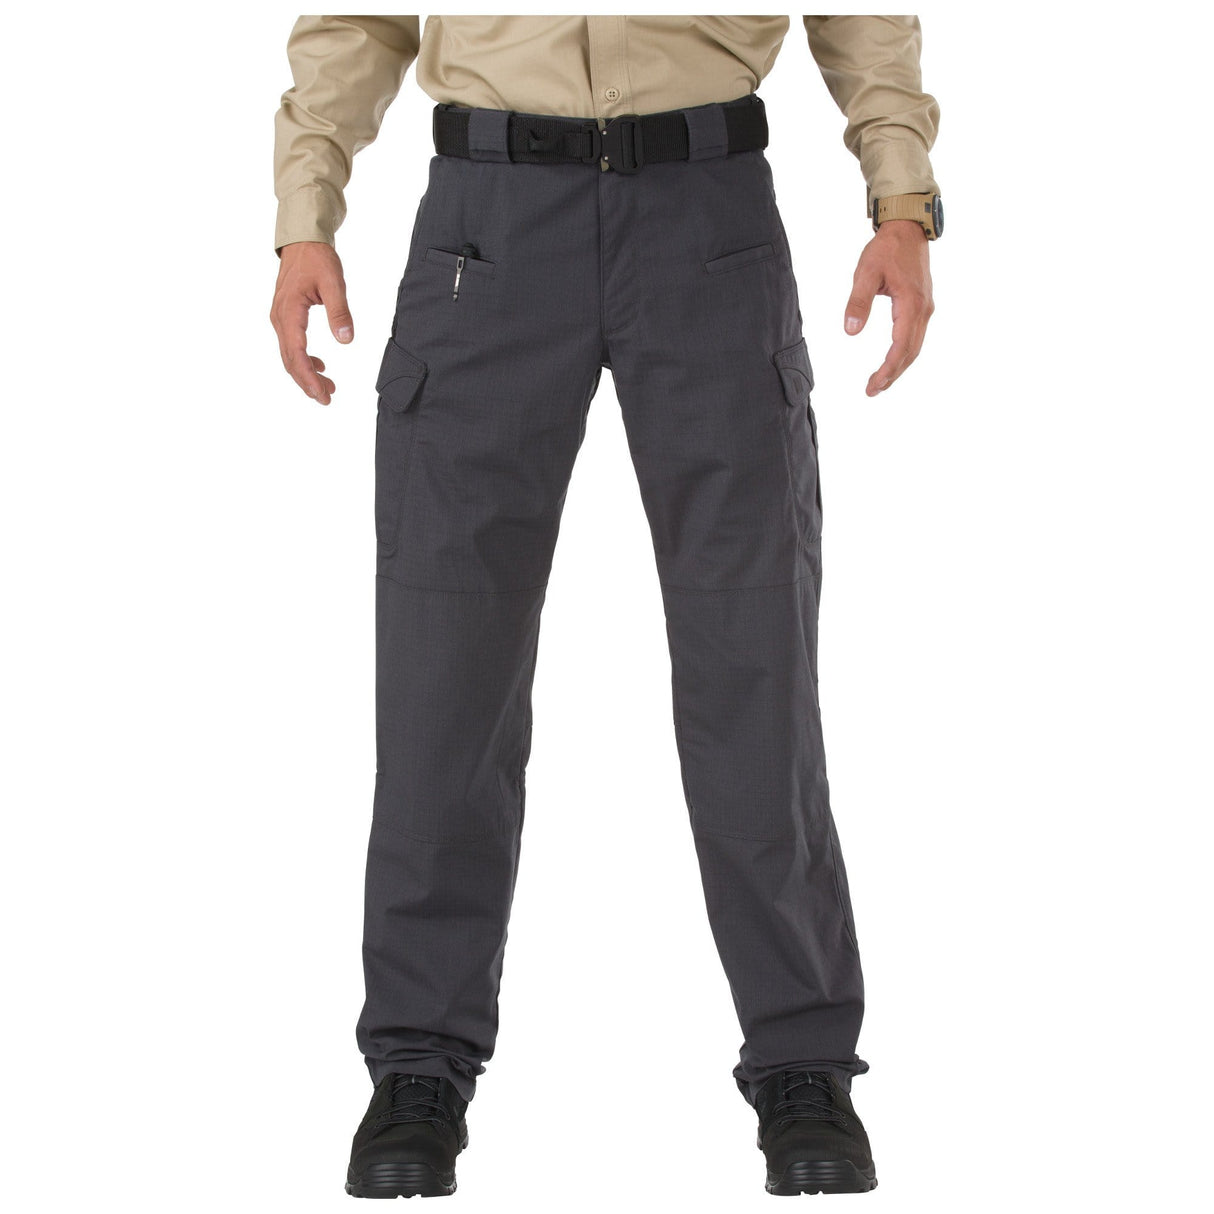 STRYKE® PANT CHARCOAL - 5.11 Tactical Finland Store